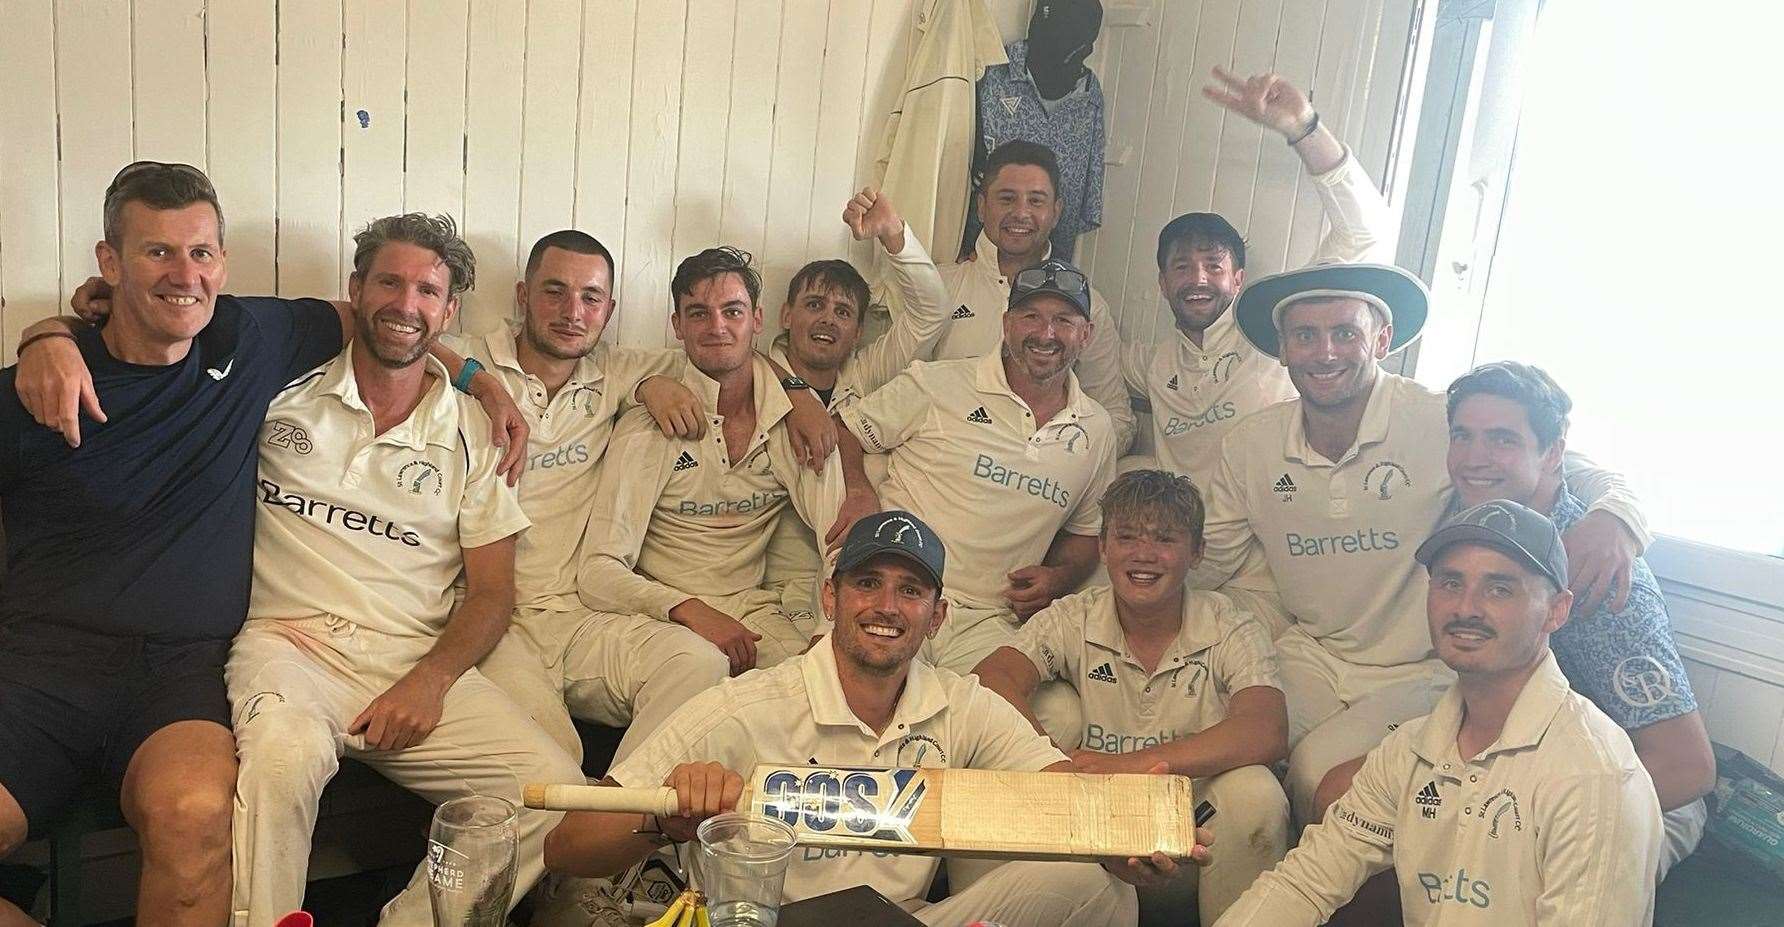 St Lawrence & Highland Court's first-team celebrate winning Kent League Division 1